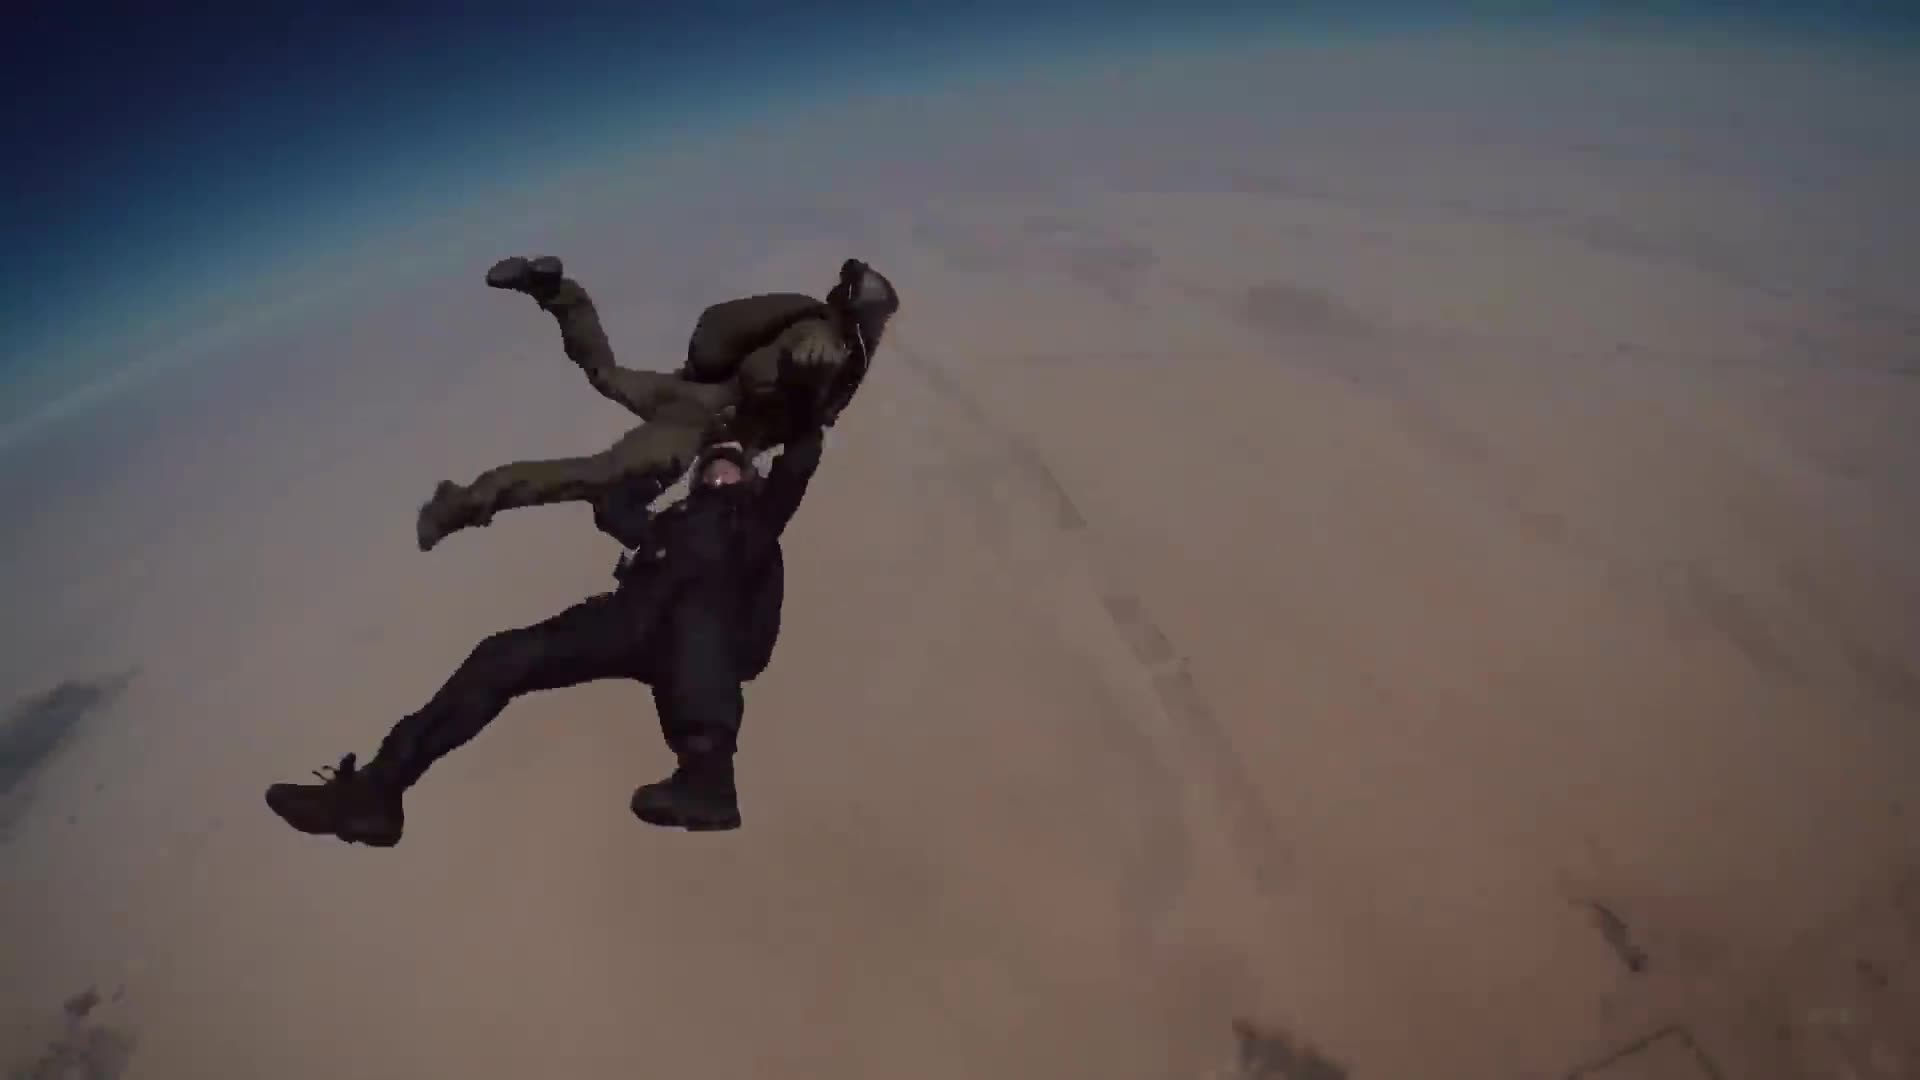 Mission: Impossible - Fallout - HALO Jump Stunt Behind The Scenes